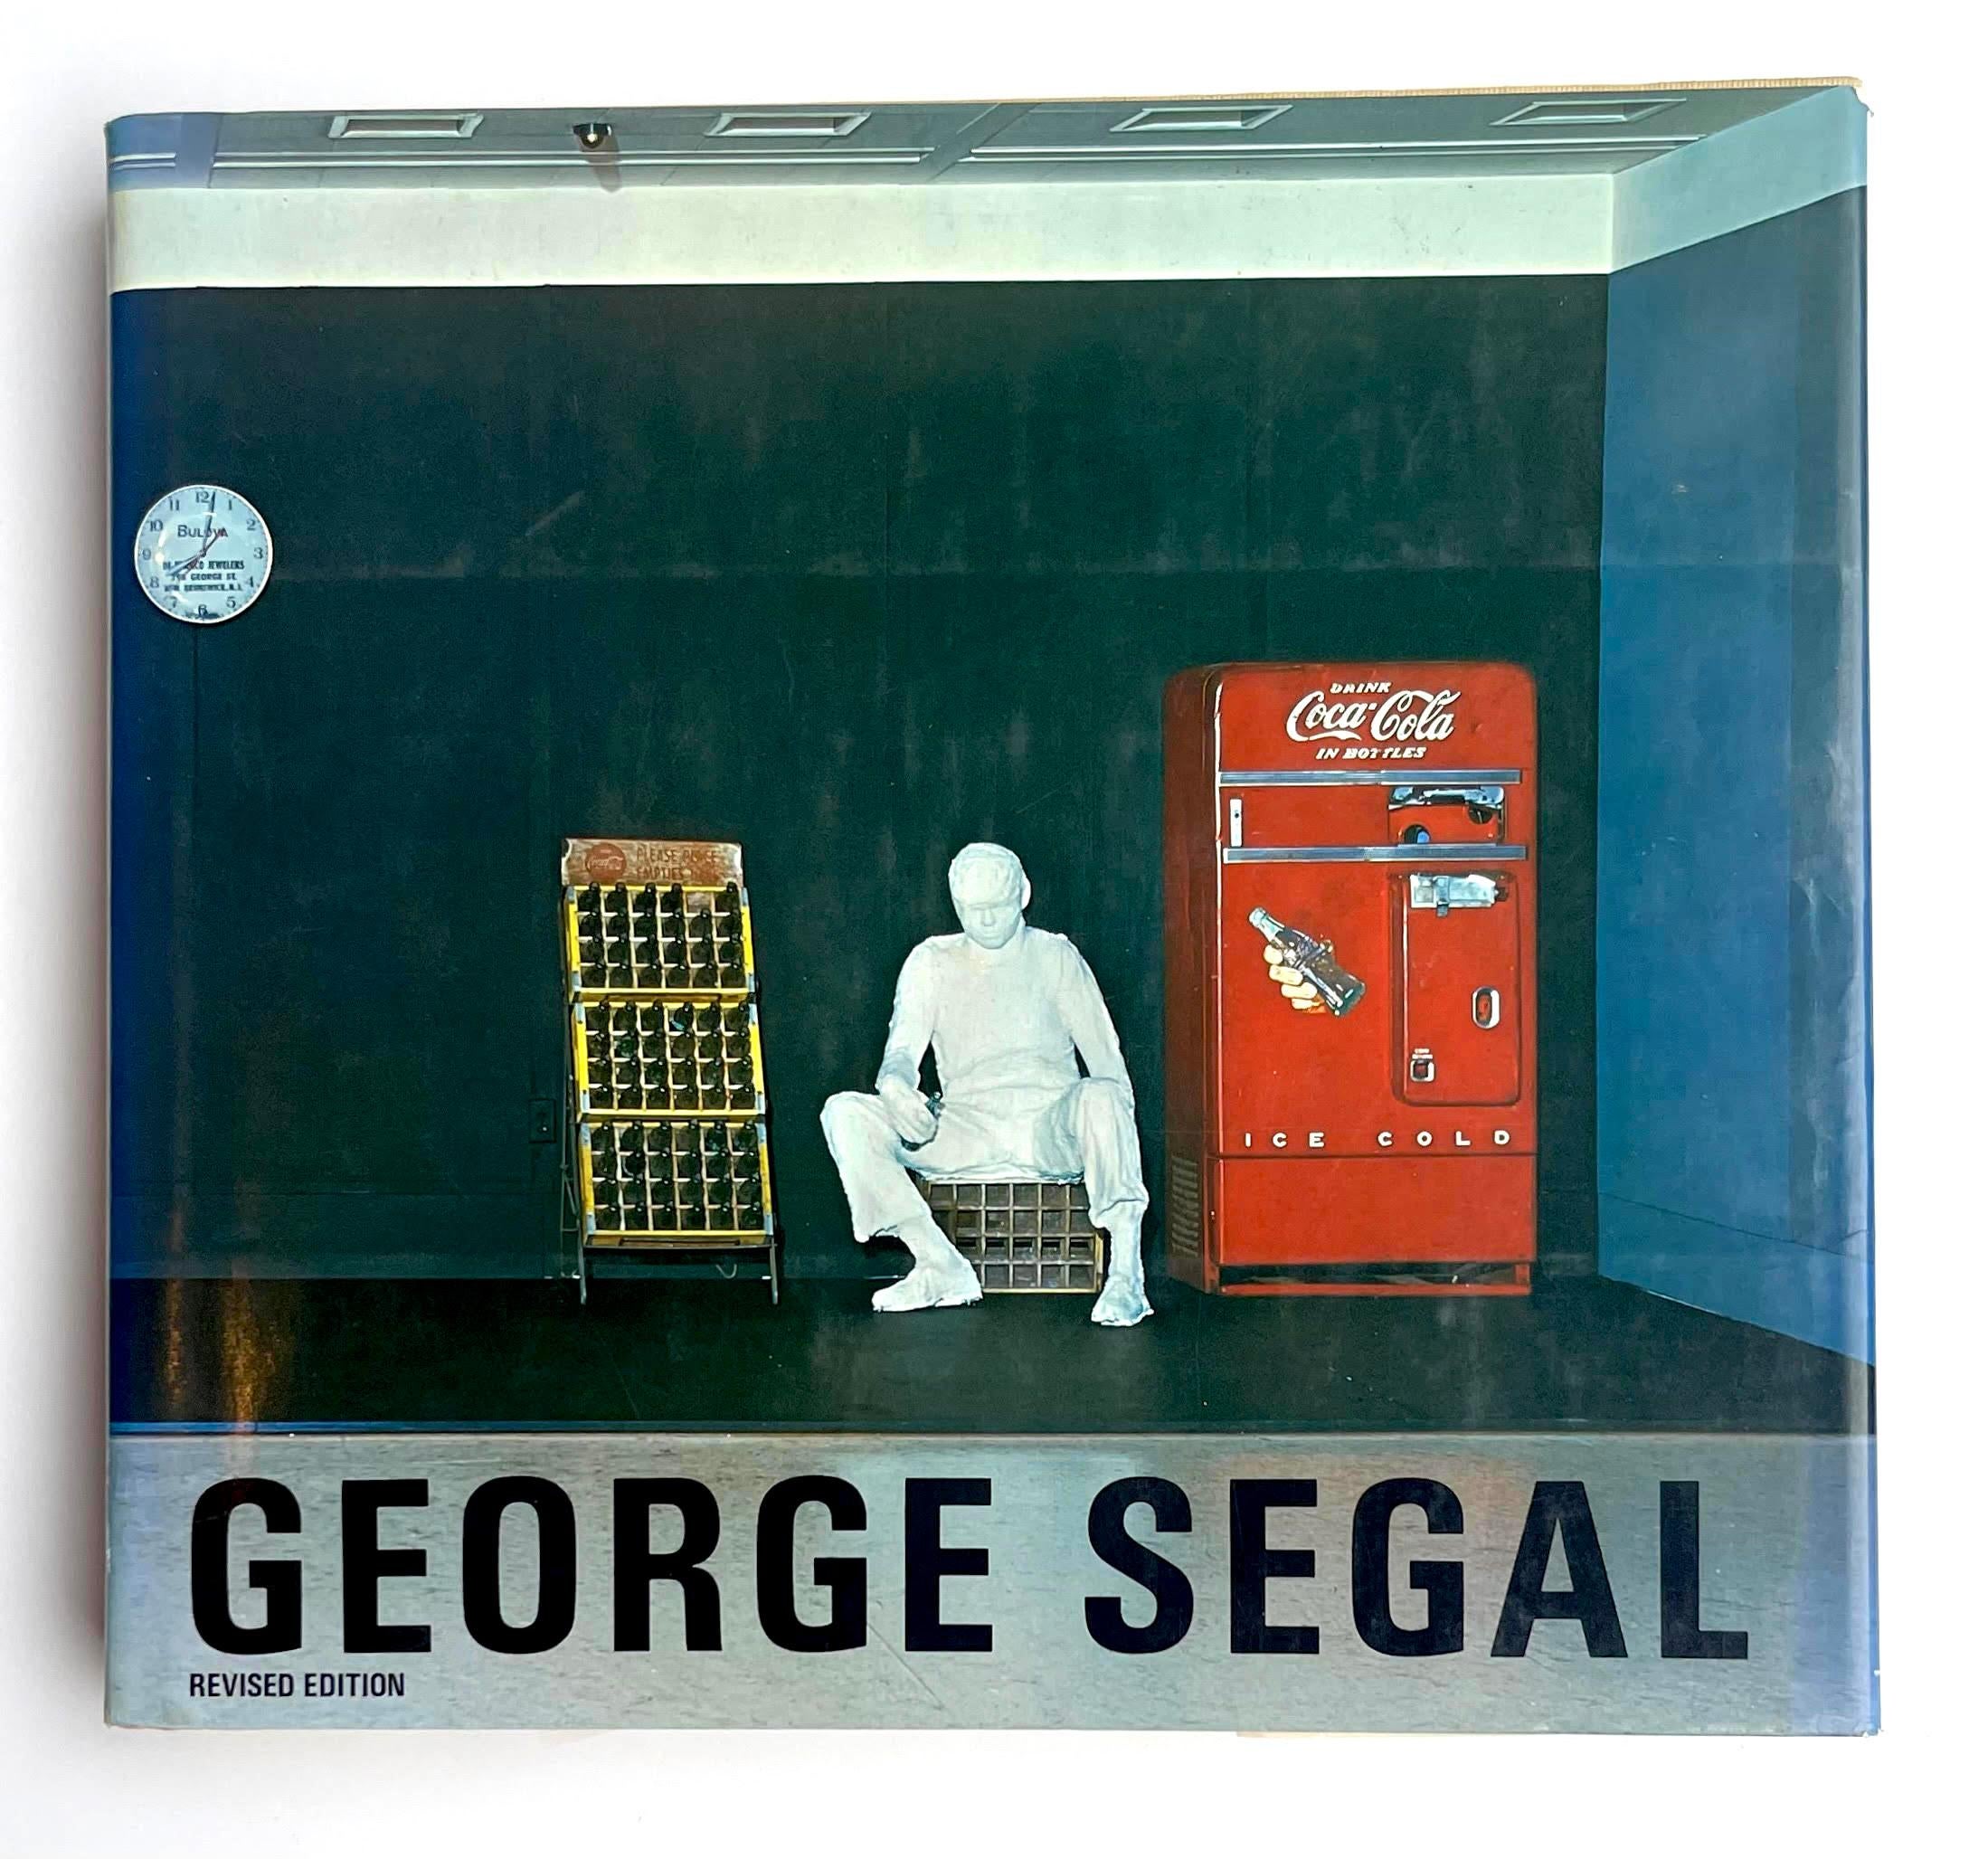 George Segal (Hand signed, dated and inscribed), 1979
Hardback monograph with dust jacket, hand signed, dated and warmly inscribed to David by George Segal
Hand signed, dated and inscribed by George Segal to David
11 × 12 × 1 1/2 inches
This